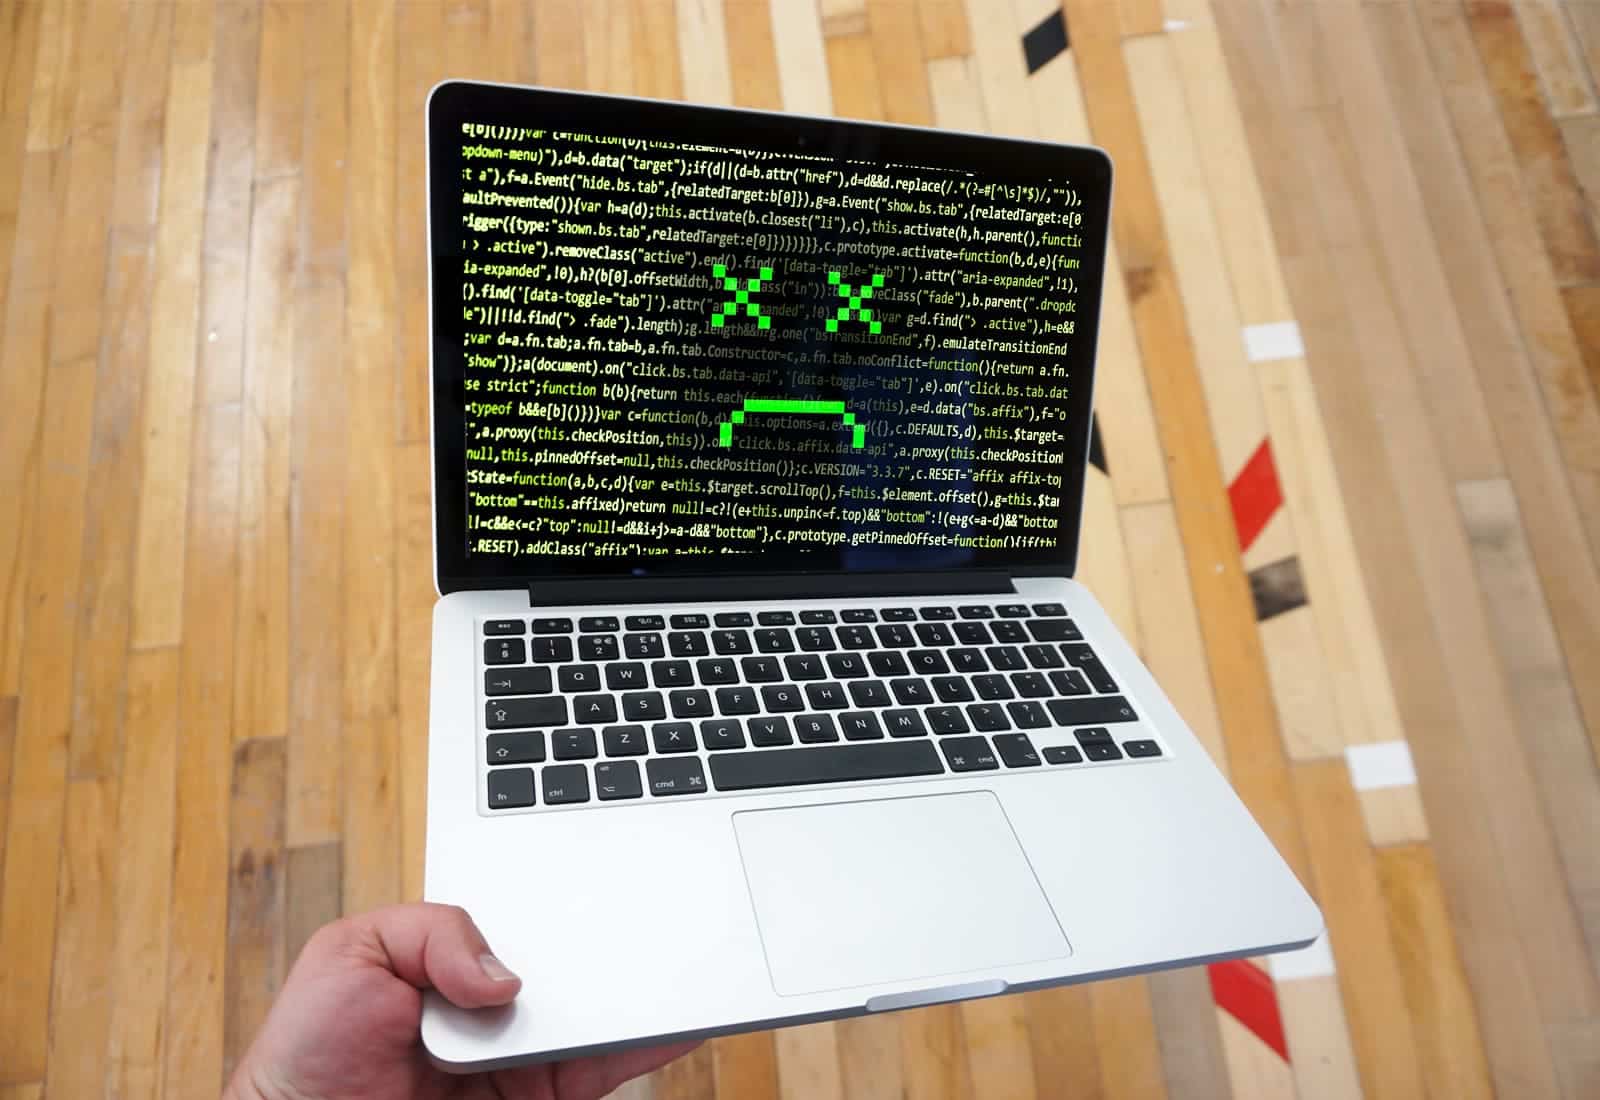 How to detect and remove viruses or malware on Mac